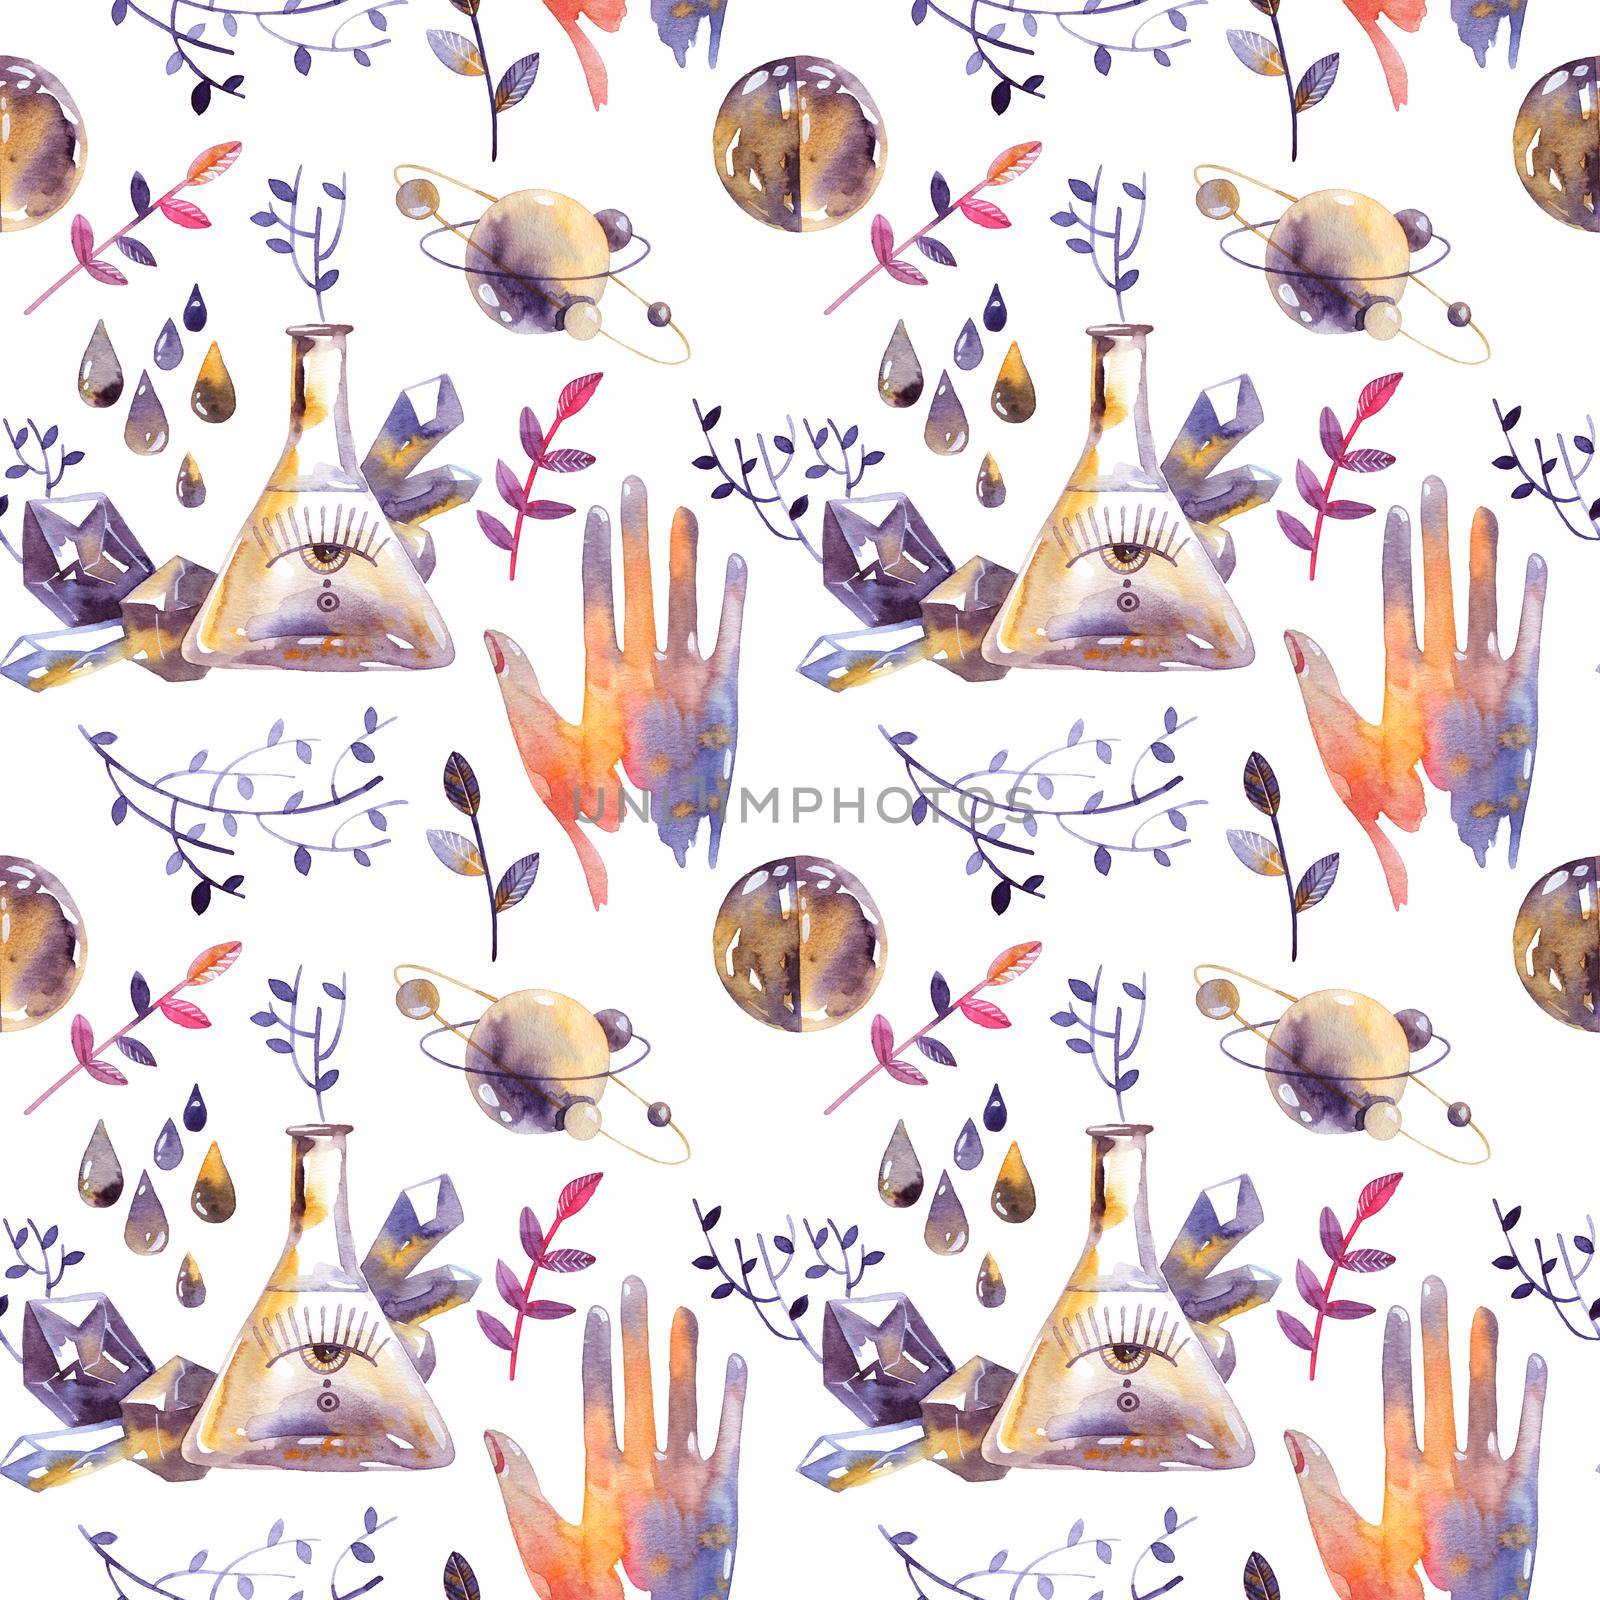 Watercolor seamless pattern in vintage style of alchemy objects - vial, all-seeing eye, crystals, hand, leaves, planets